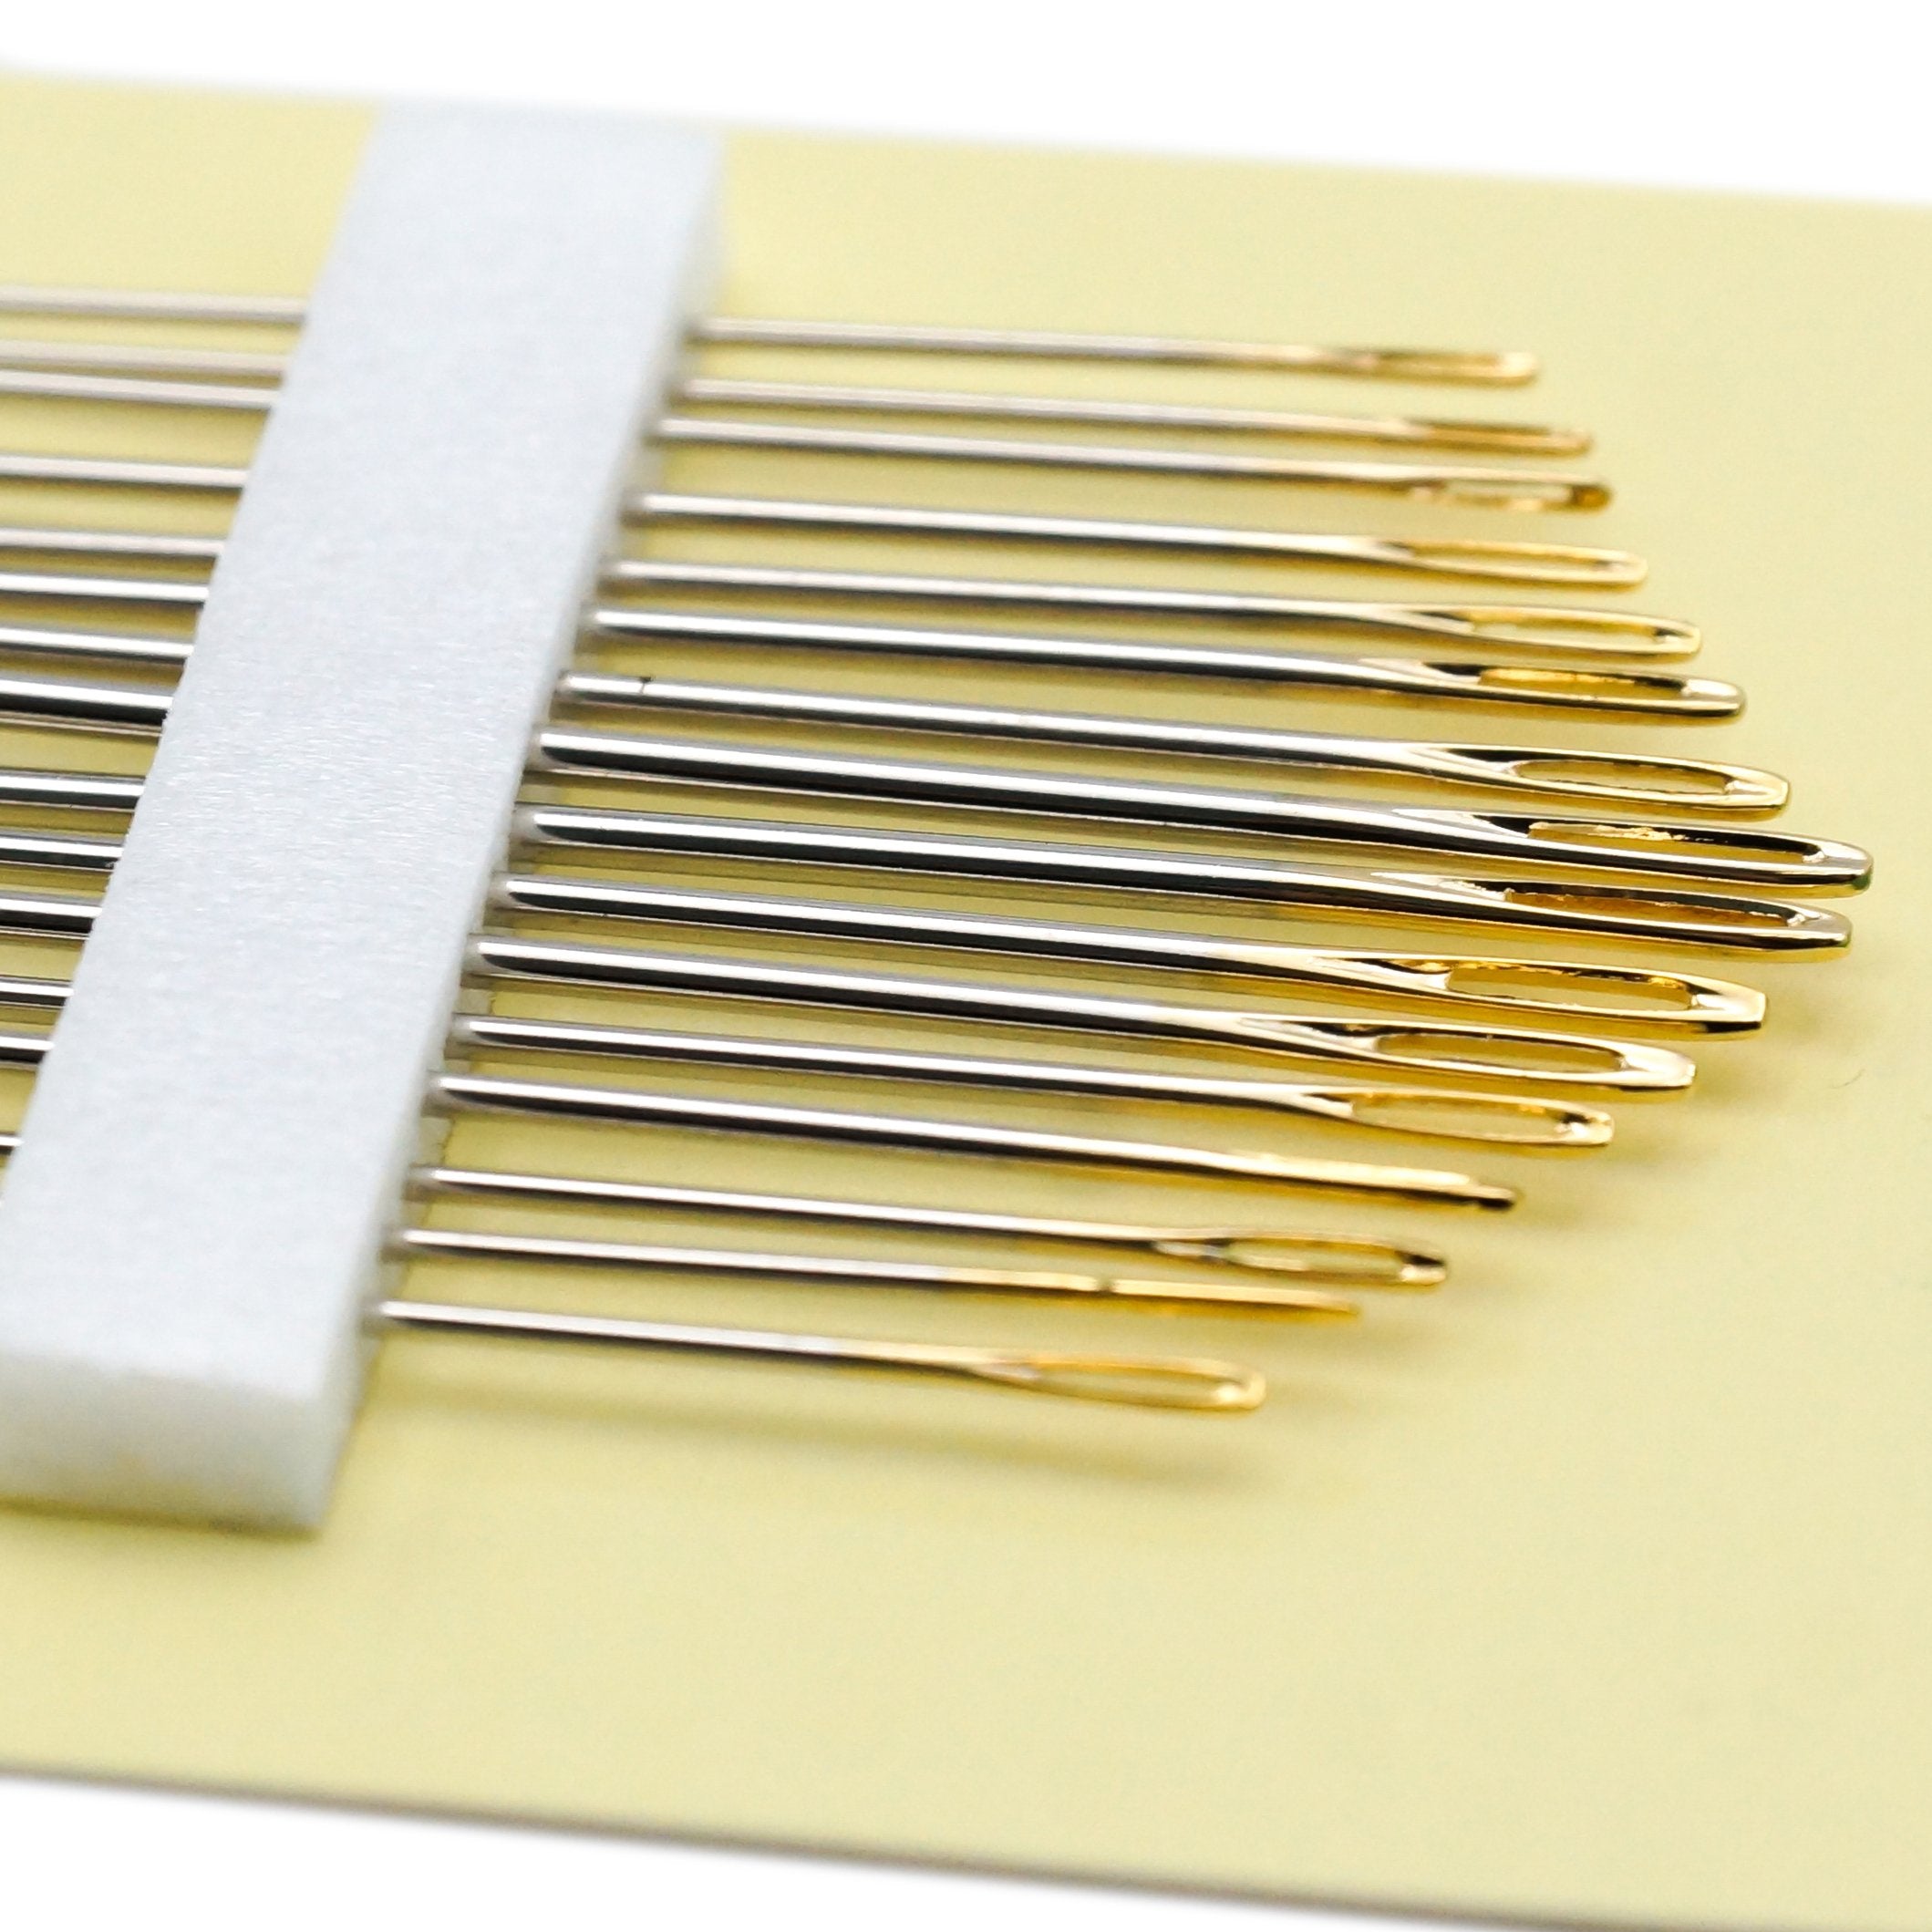 66Pcs Golden Sewing Needles Stainless Steel Self Threading Needles for Hand  Stitching Embroidery Cross Stitch Hand